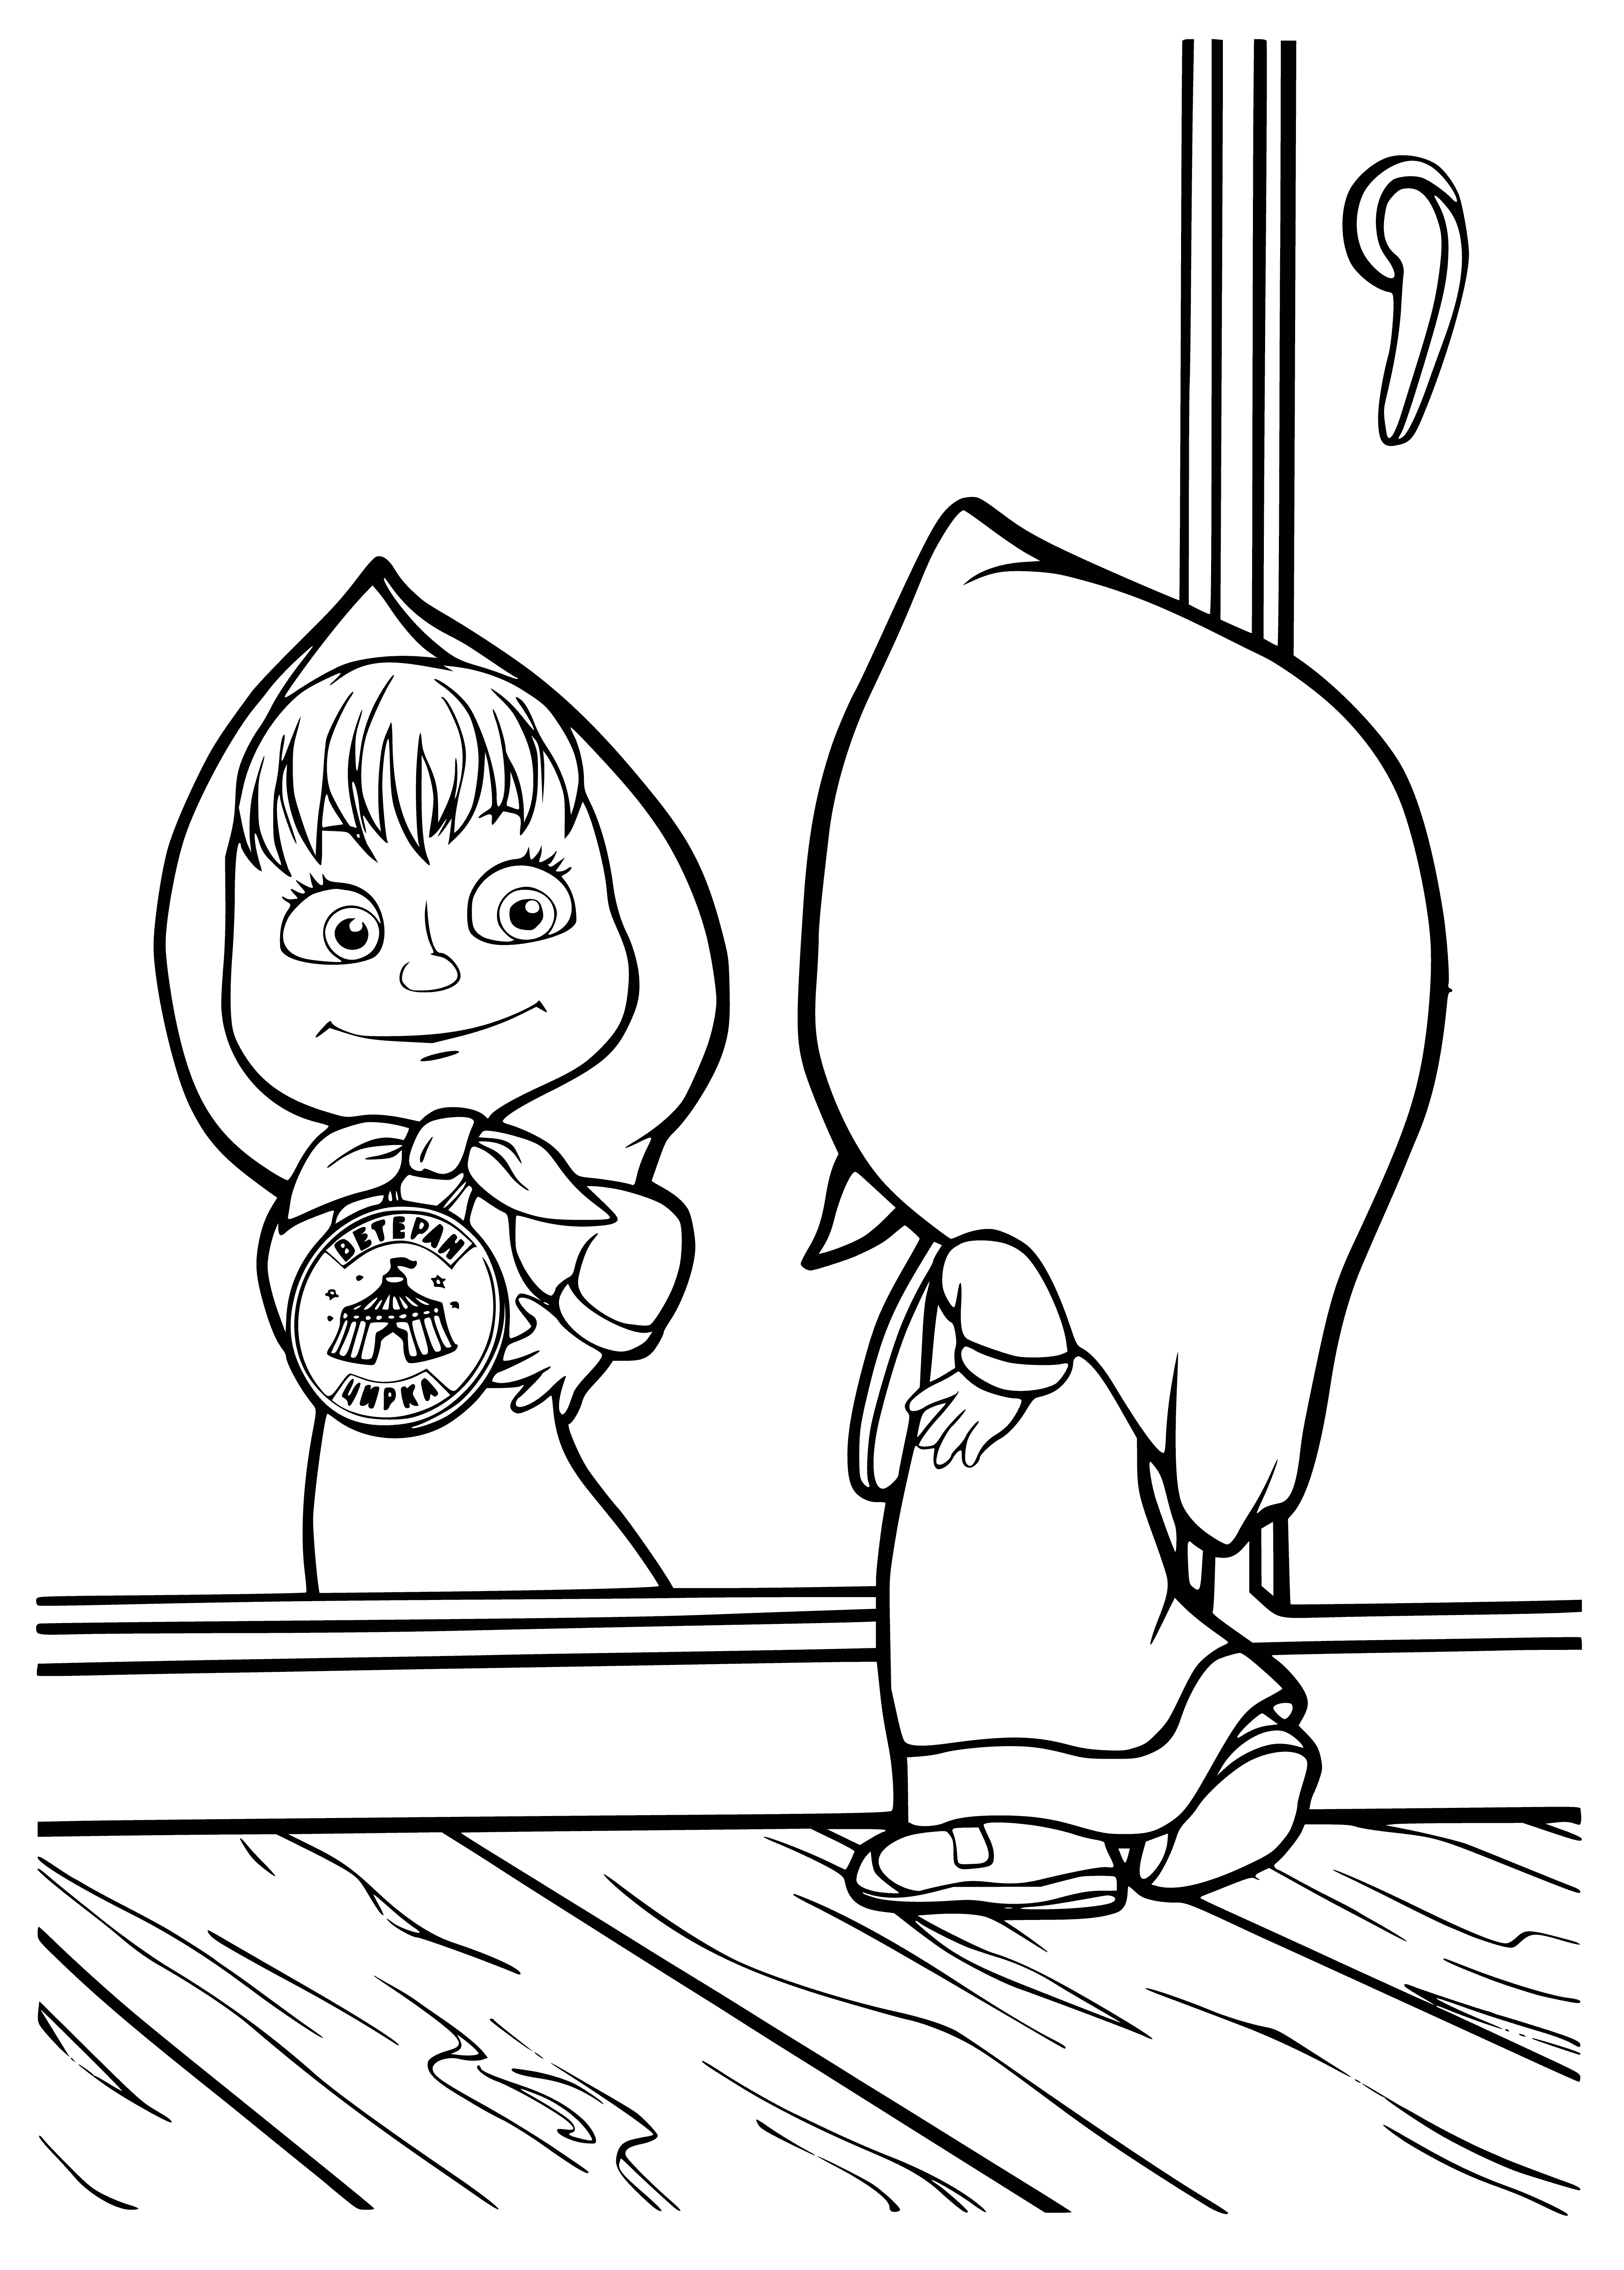 coloring page: Masha stands triumphant, waving at the crowd with a medal around her neck; the Bear holds her proudly.